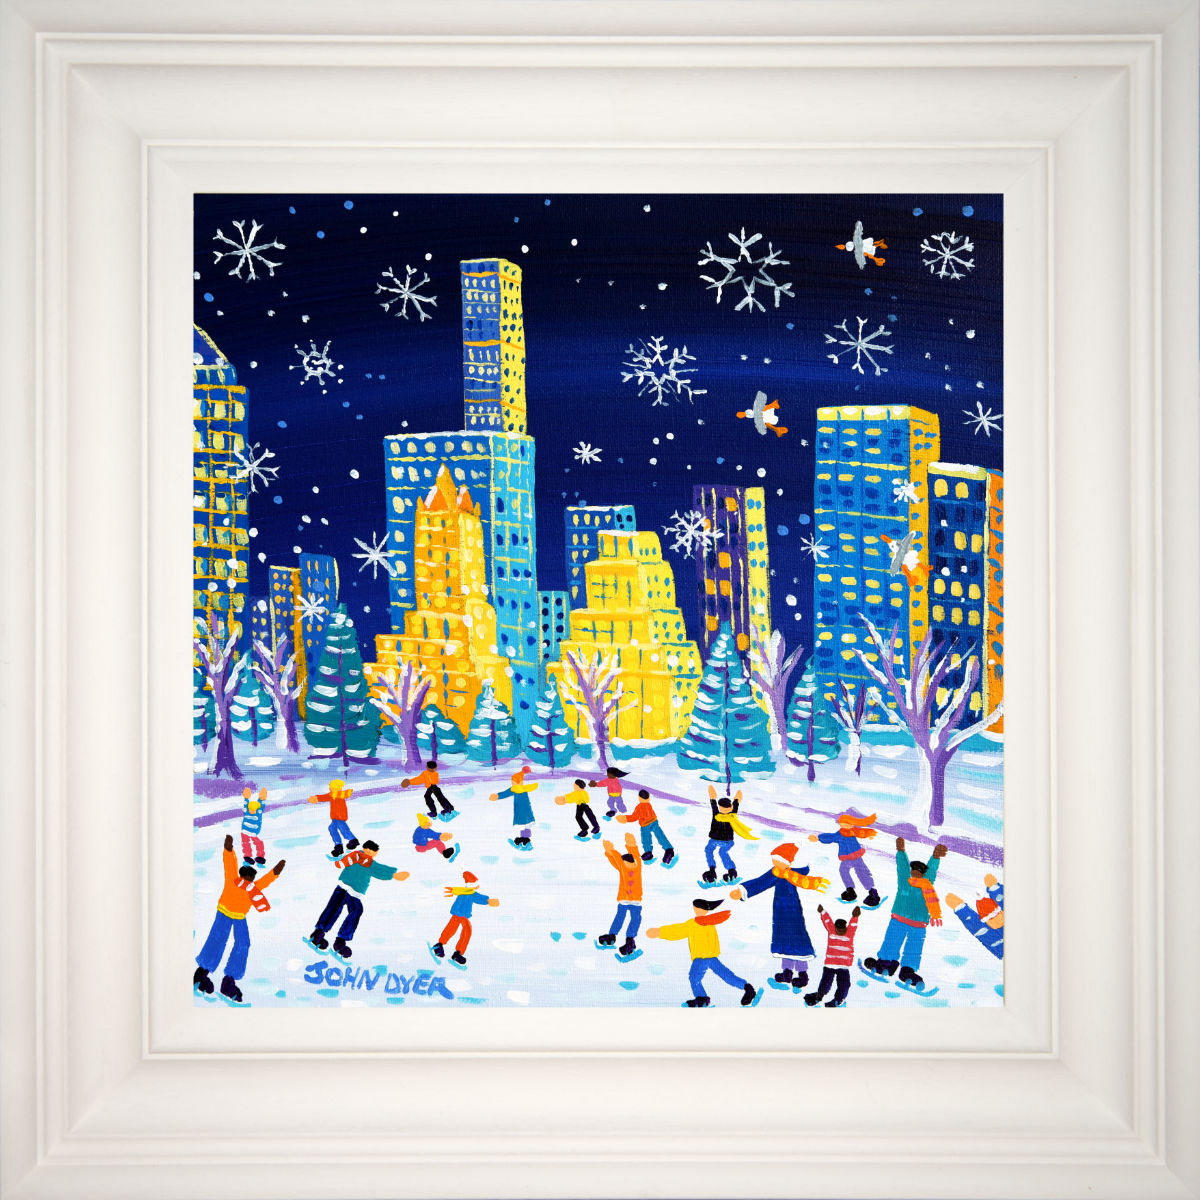 &#39;Winter Wonderland, Central Park, New York&#39;, 12x12 inches acrylic on canvas. Paintings of America by British Artist John Dyer. American Art Gallery. Ice Skating